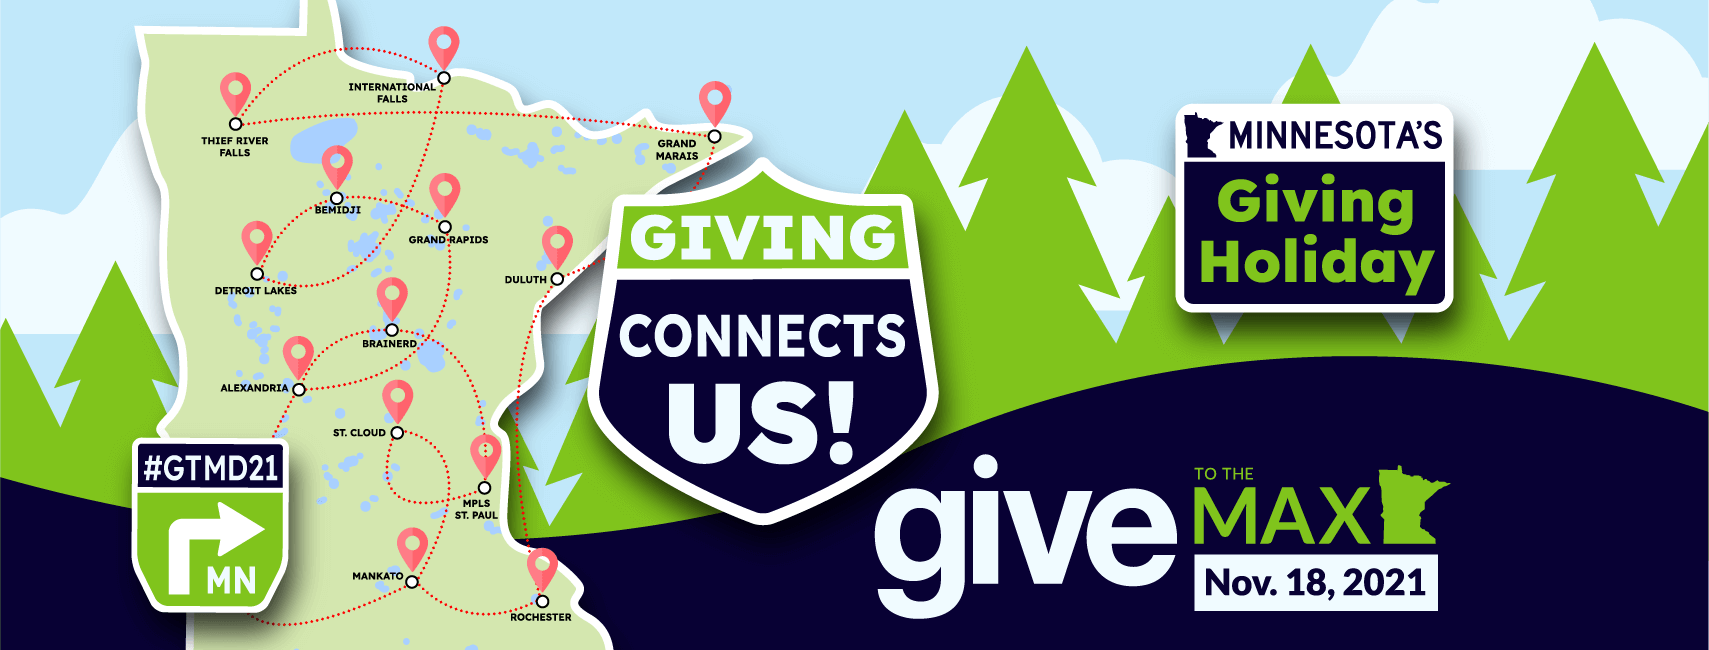 "Map of Minnesota over illustrated landscape of evergreen trees and clouds with road signs for 'Minnesota's Giving Holiday,' 'Giving Connects Us!,' '#GTMD21 This Way' and word mark for Give to the Max, Nov. 18, 2021"